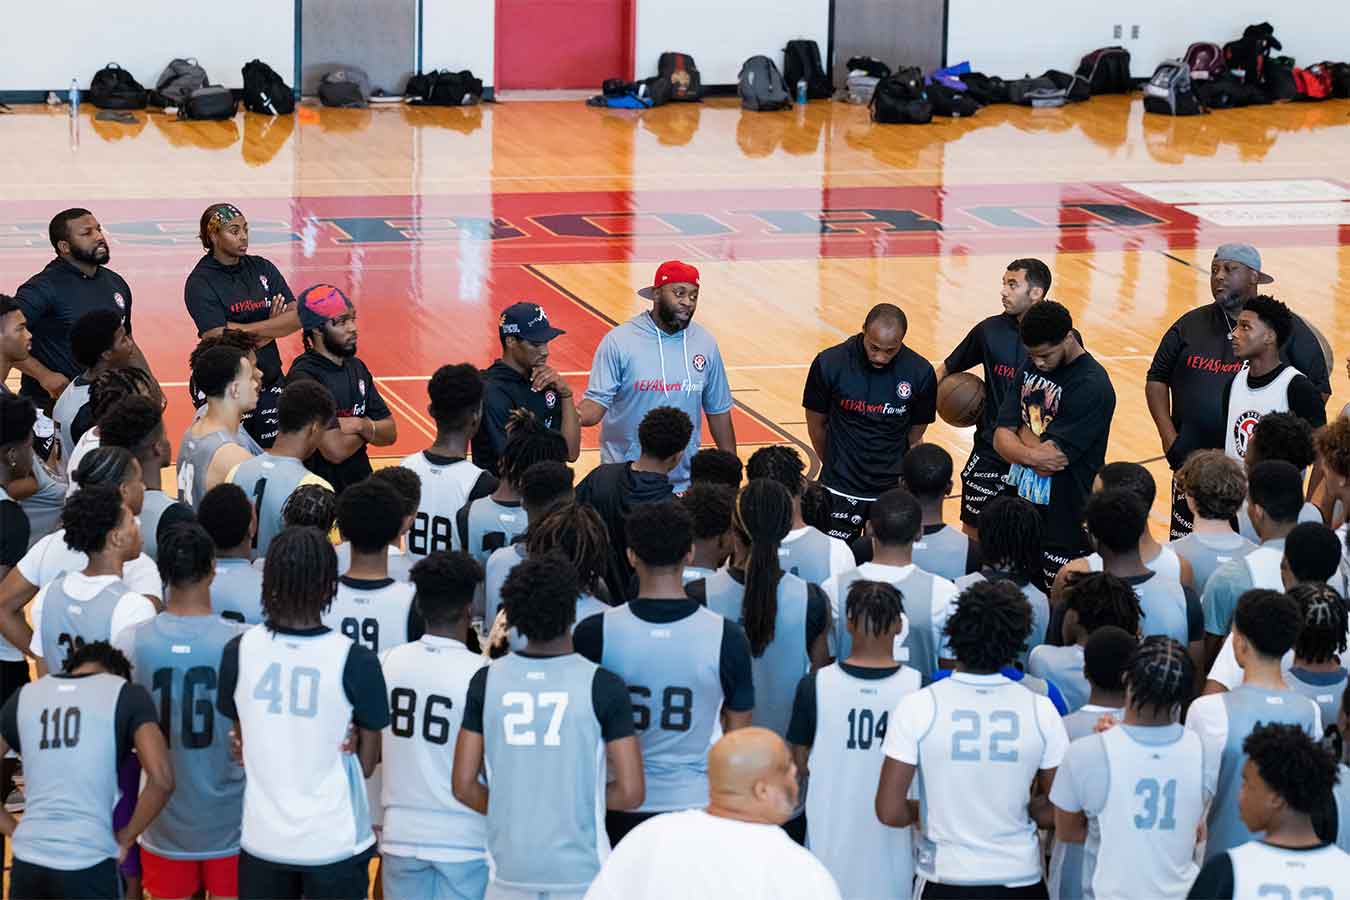 Braderious Martin  (pictured center wearing a grey short-sleeve hoodie and red hat talks to basketball players.